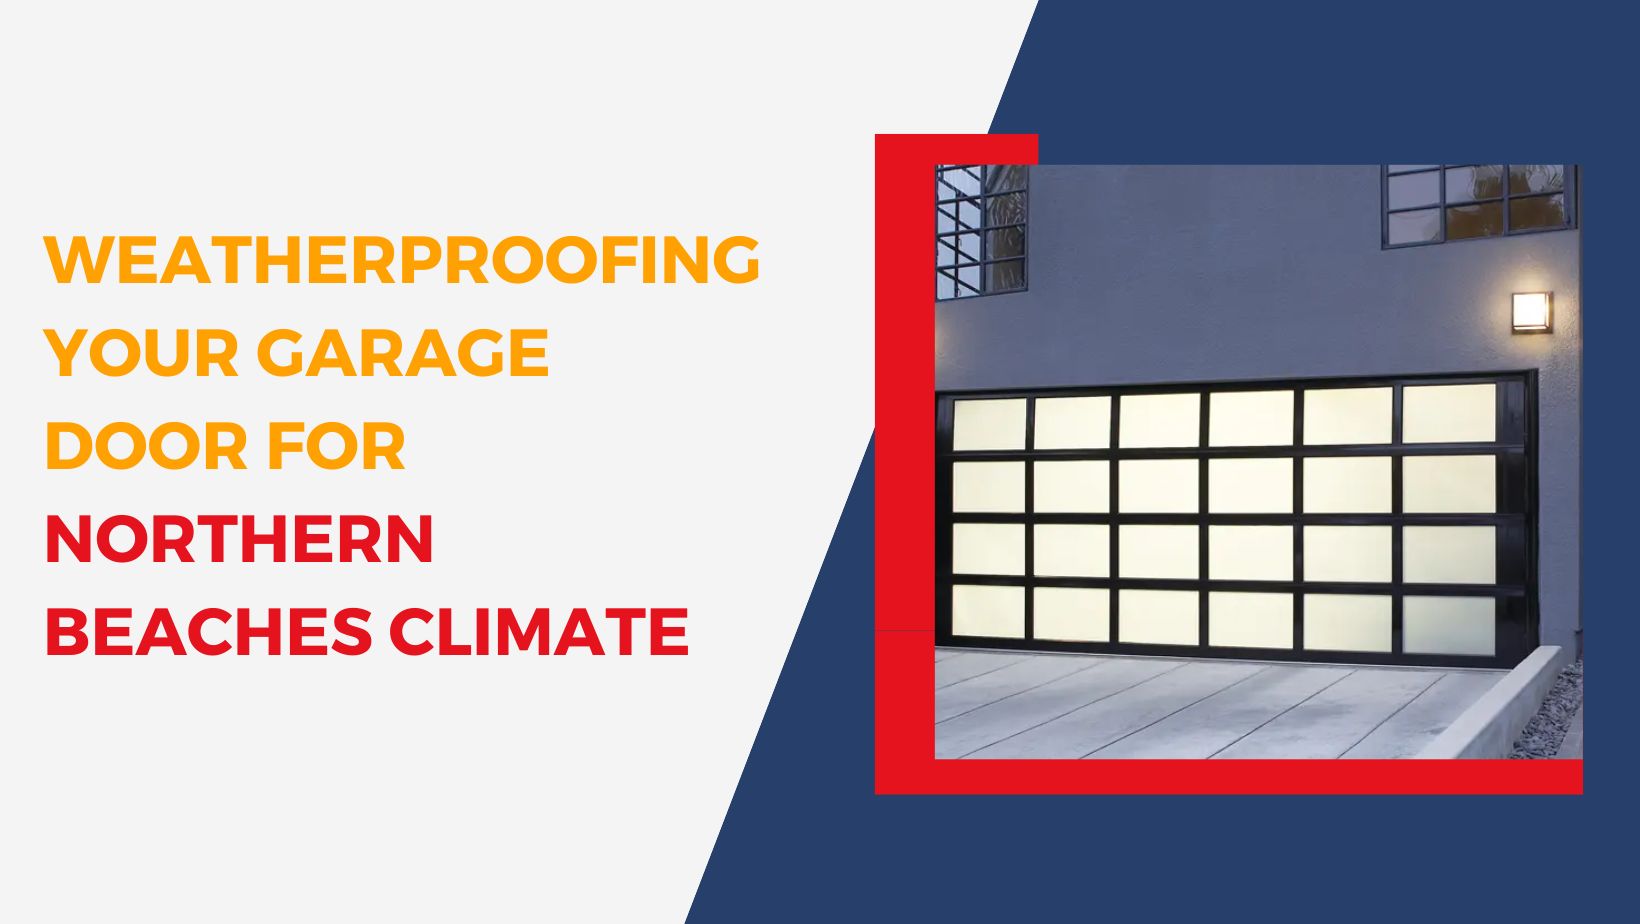 Weatherproofing Your Garage Door for the Northern Beaches Climate